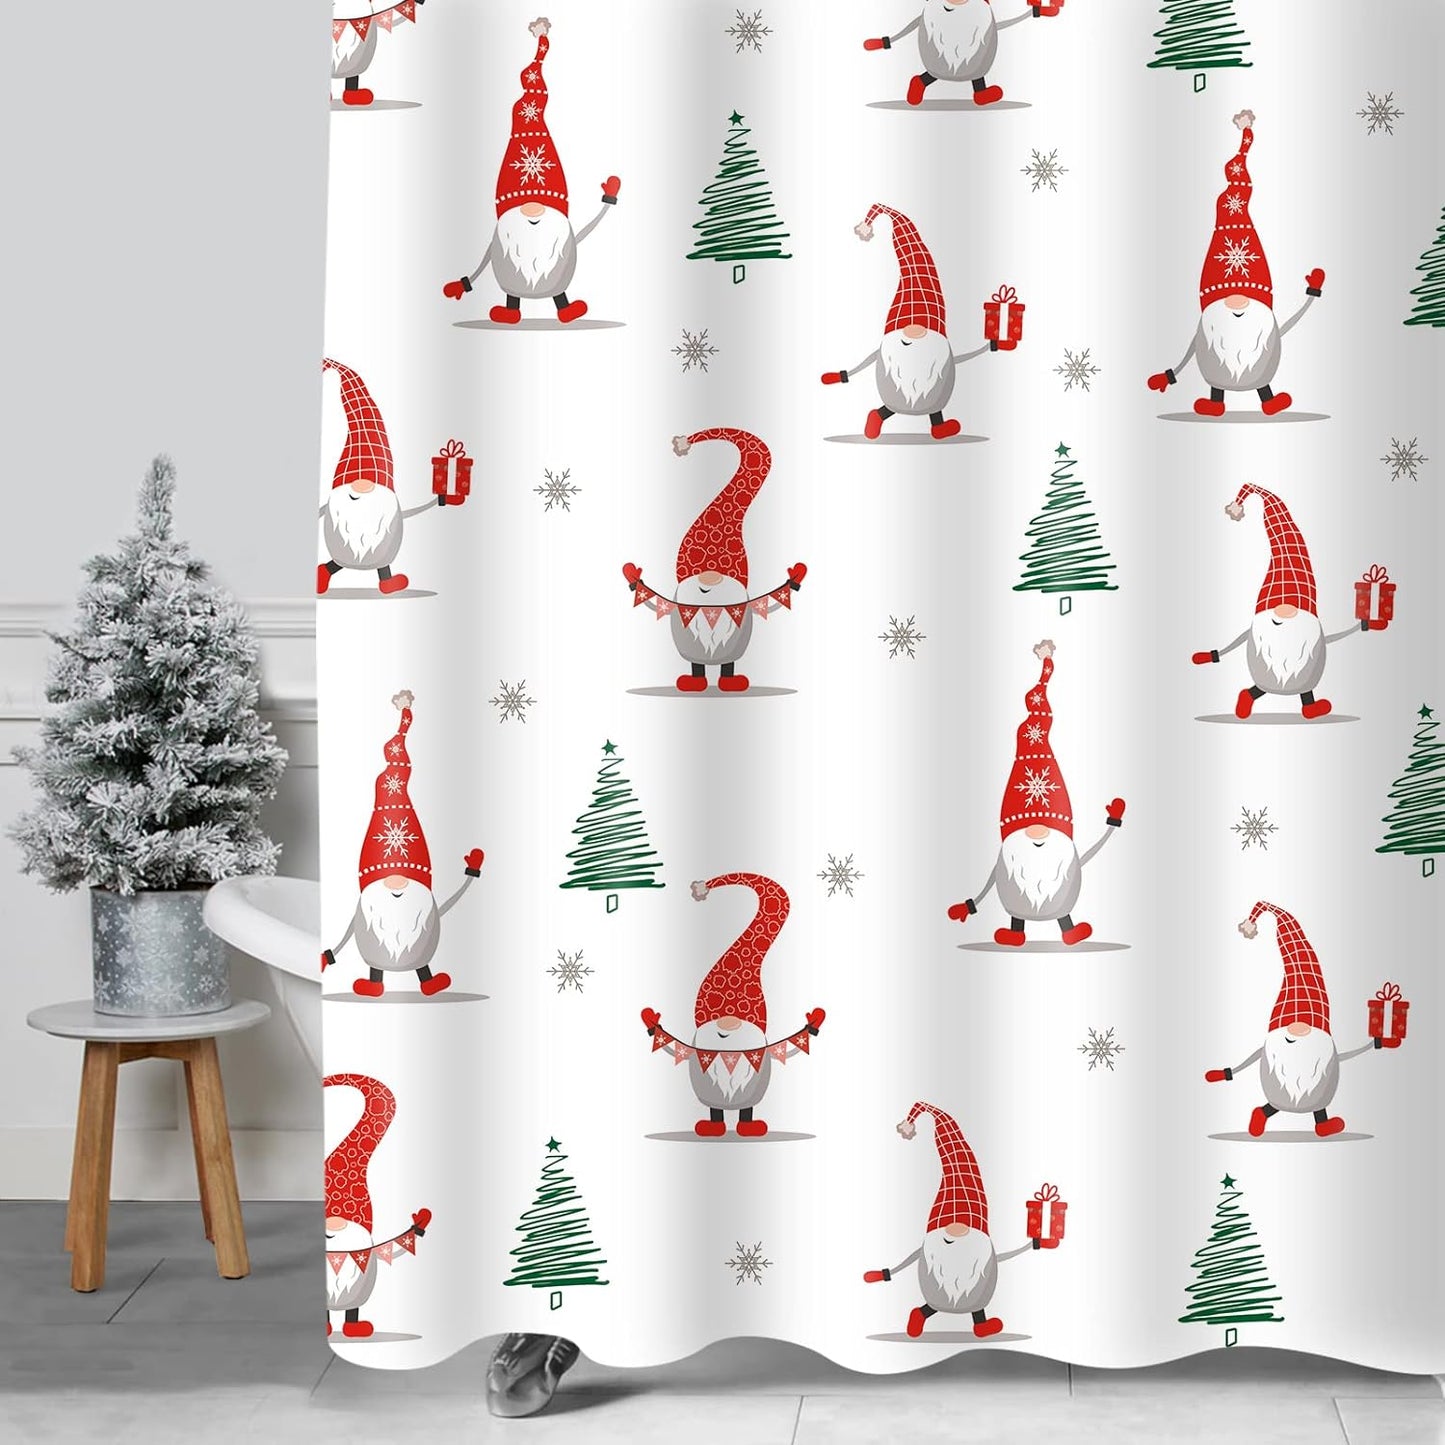 Geometric Modern Design Christmas Shower Curtain Christmas Tree Bathroom Home Office Holiday Wall Decoration as Tapestry and Photo Booth Backdrop Red Green White Printed